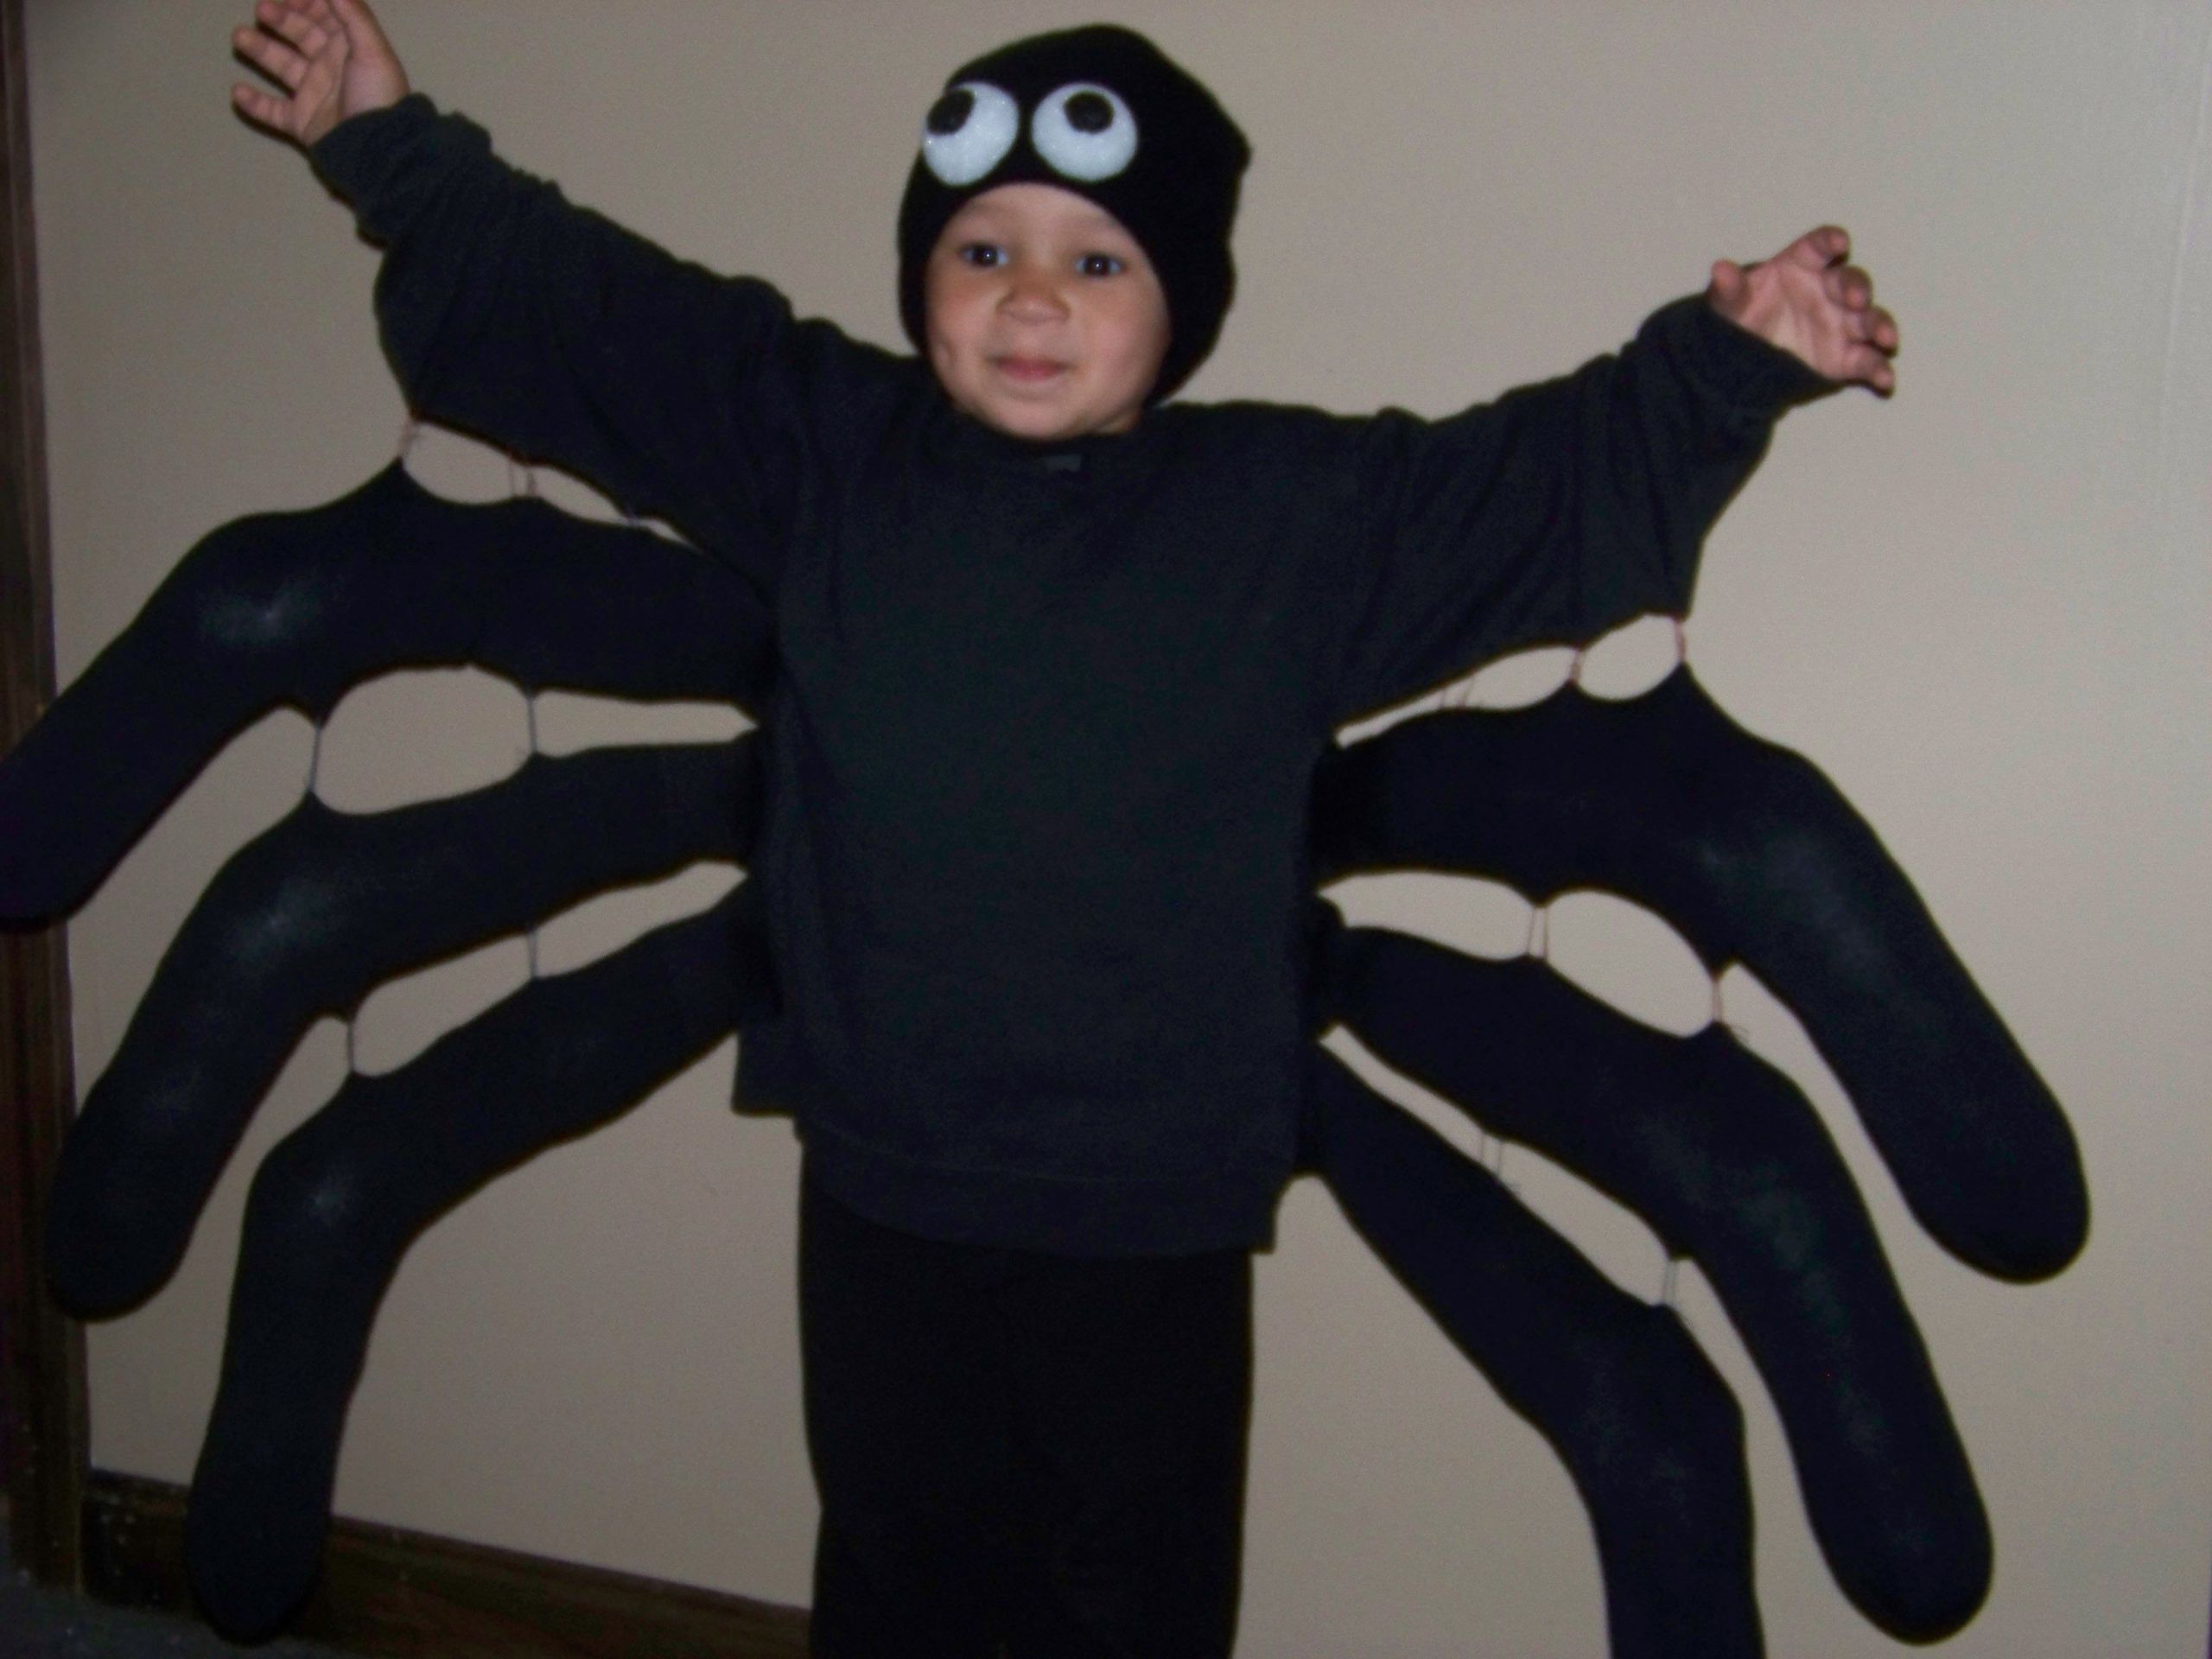 DIY Spider Costume For Adults
 Spider costume Styrofoam ball cut in half for eyes black